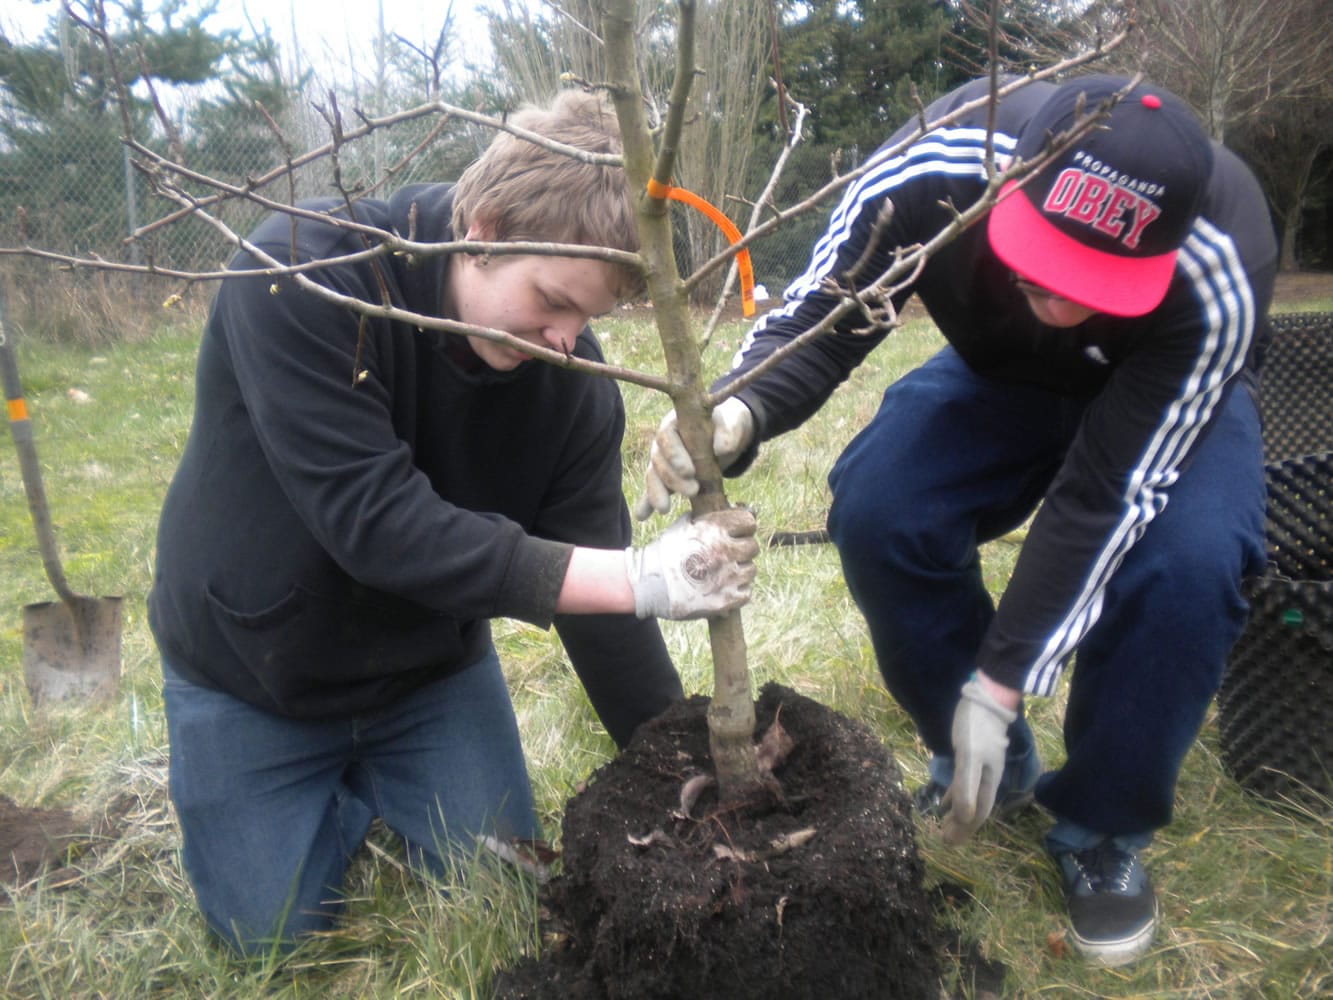 Bagley Downs: Jason Krieger, left, and Devan Rutherford plant trees at the Columbia River Mental Health garden.